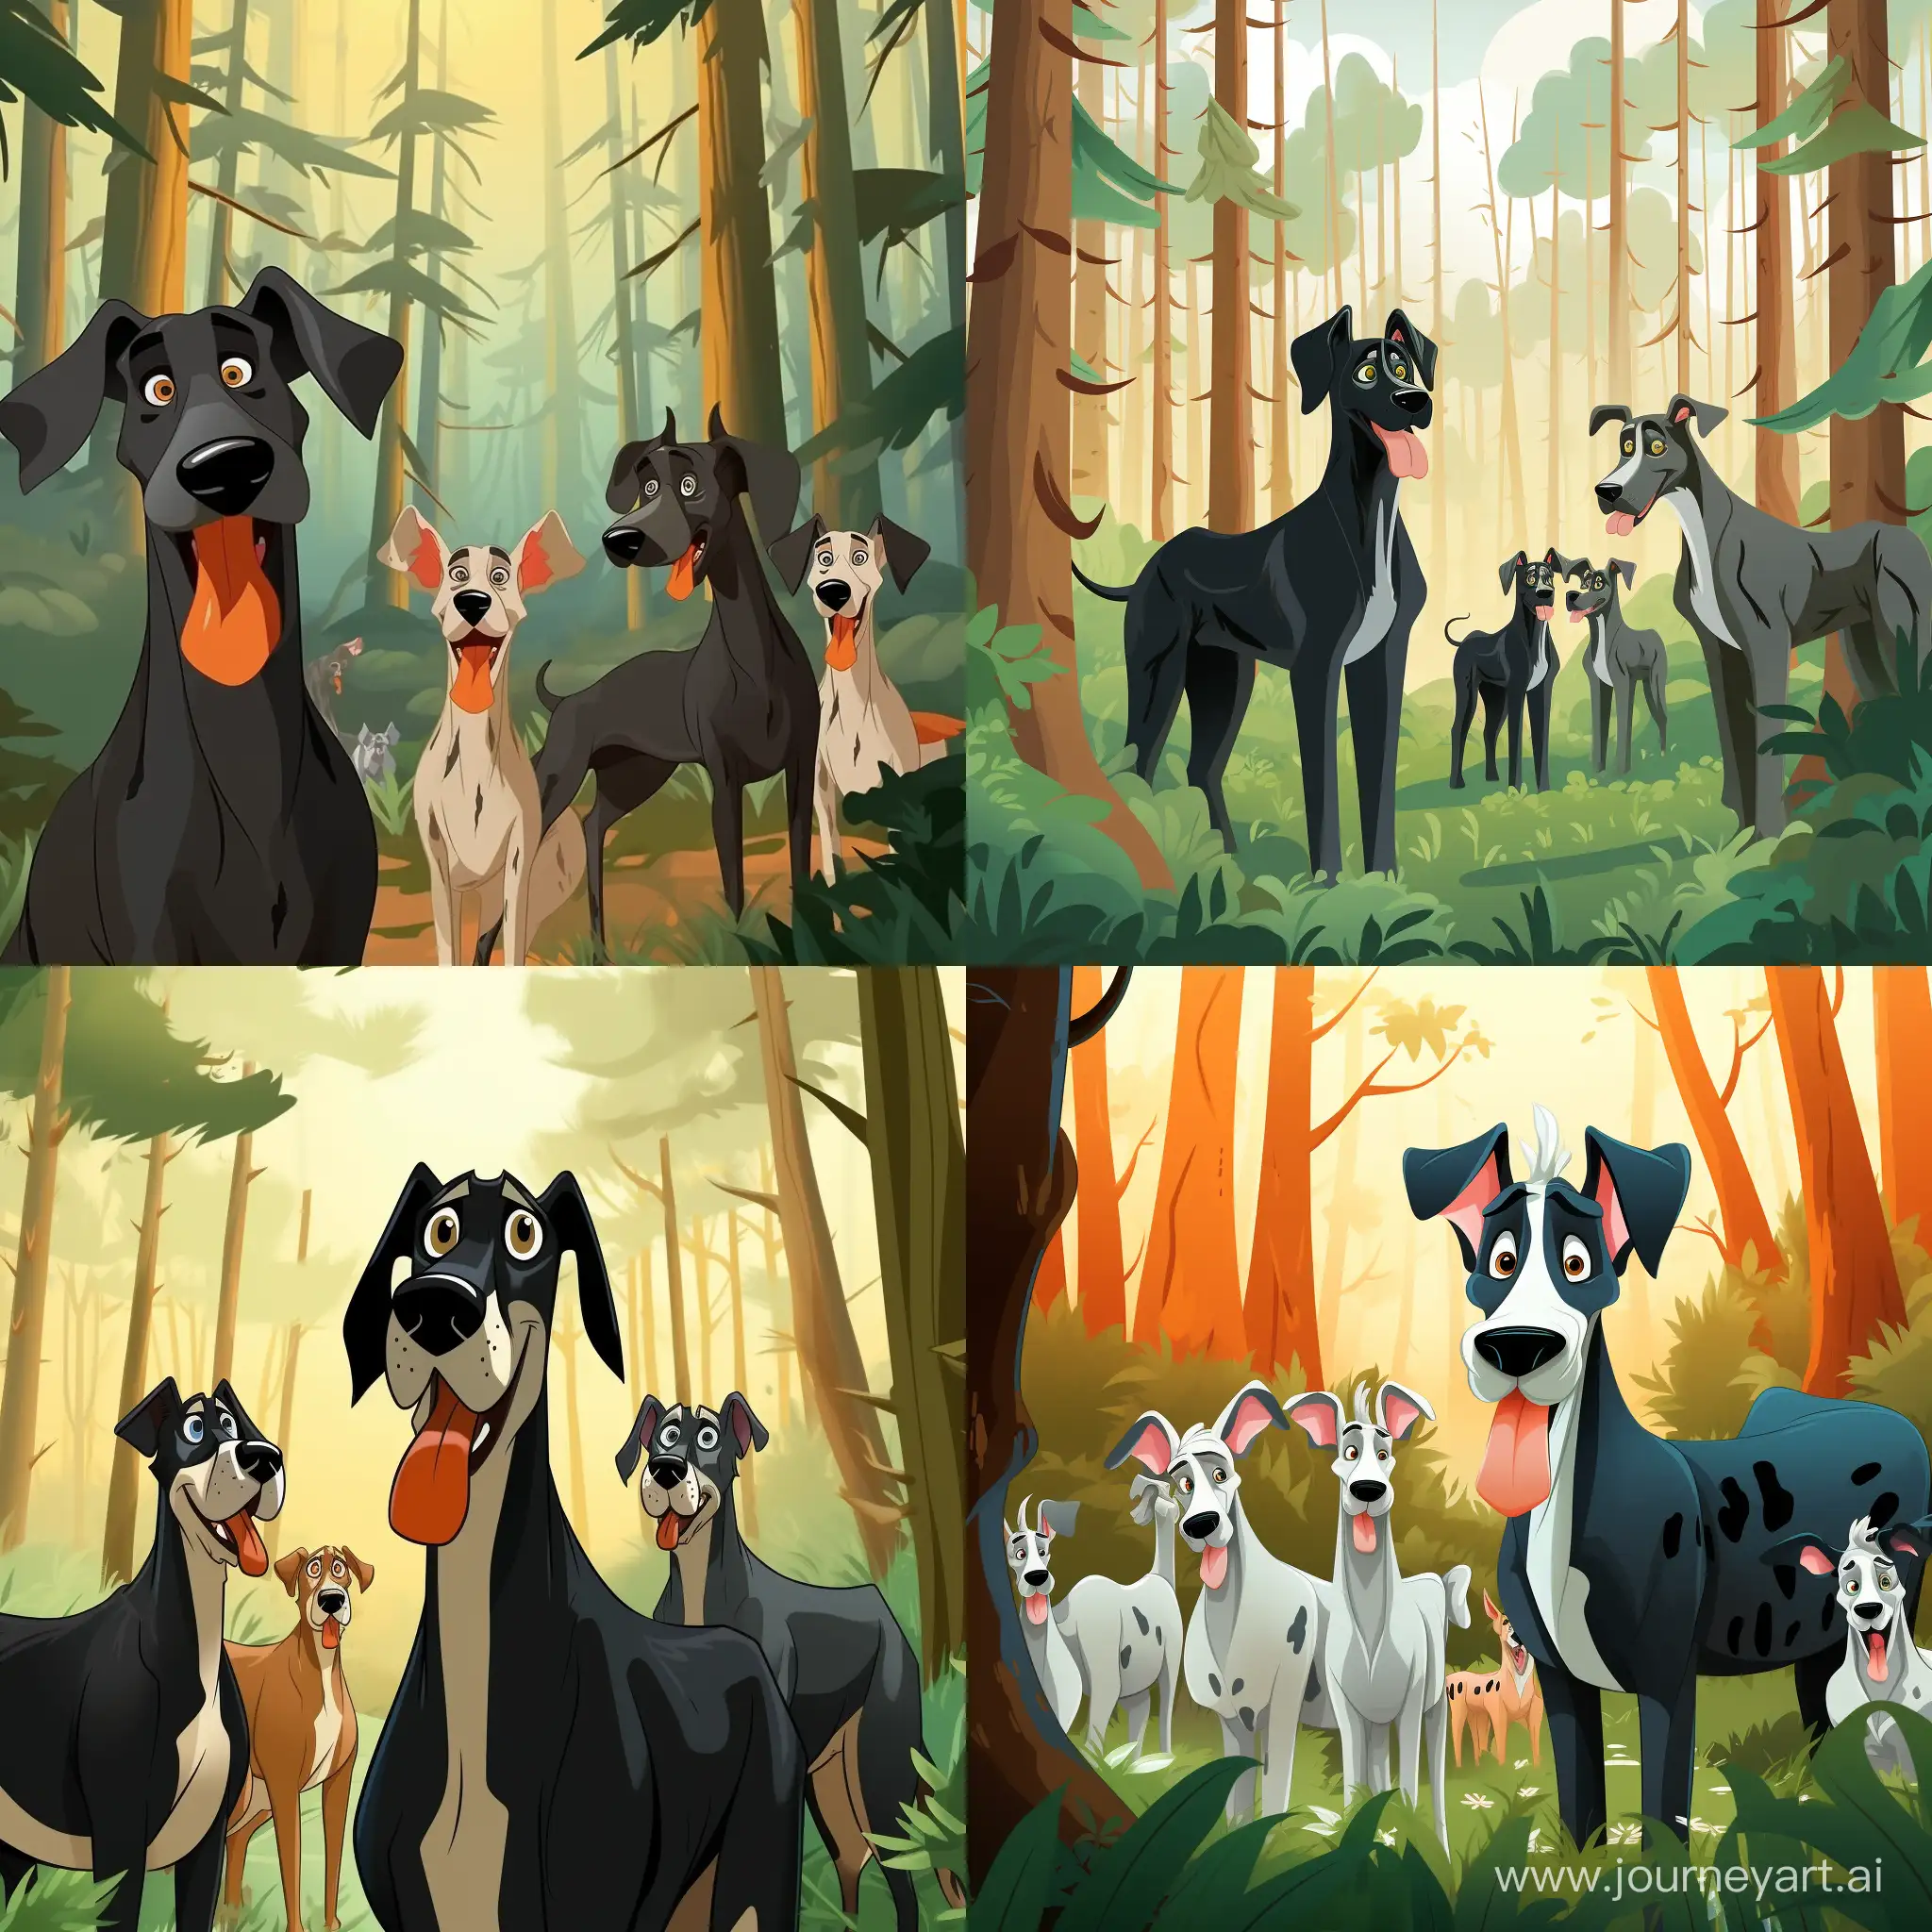 Group of great danes with erect ears playing. Animated cartoon. Forest background